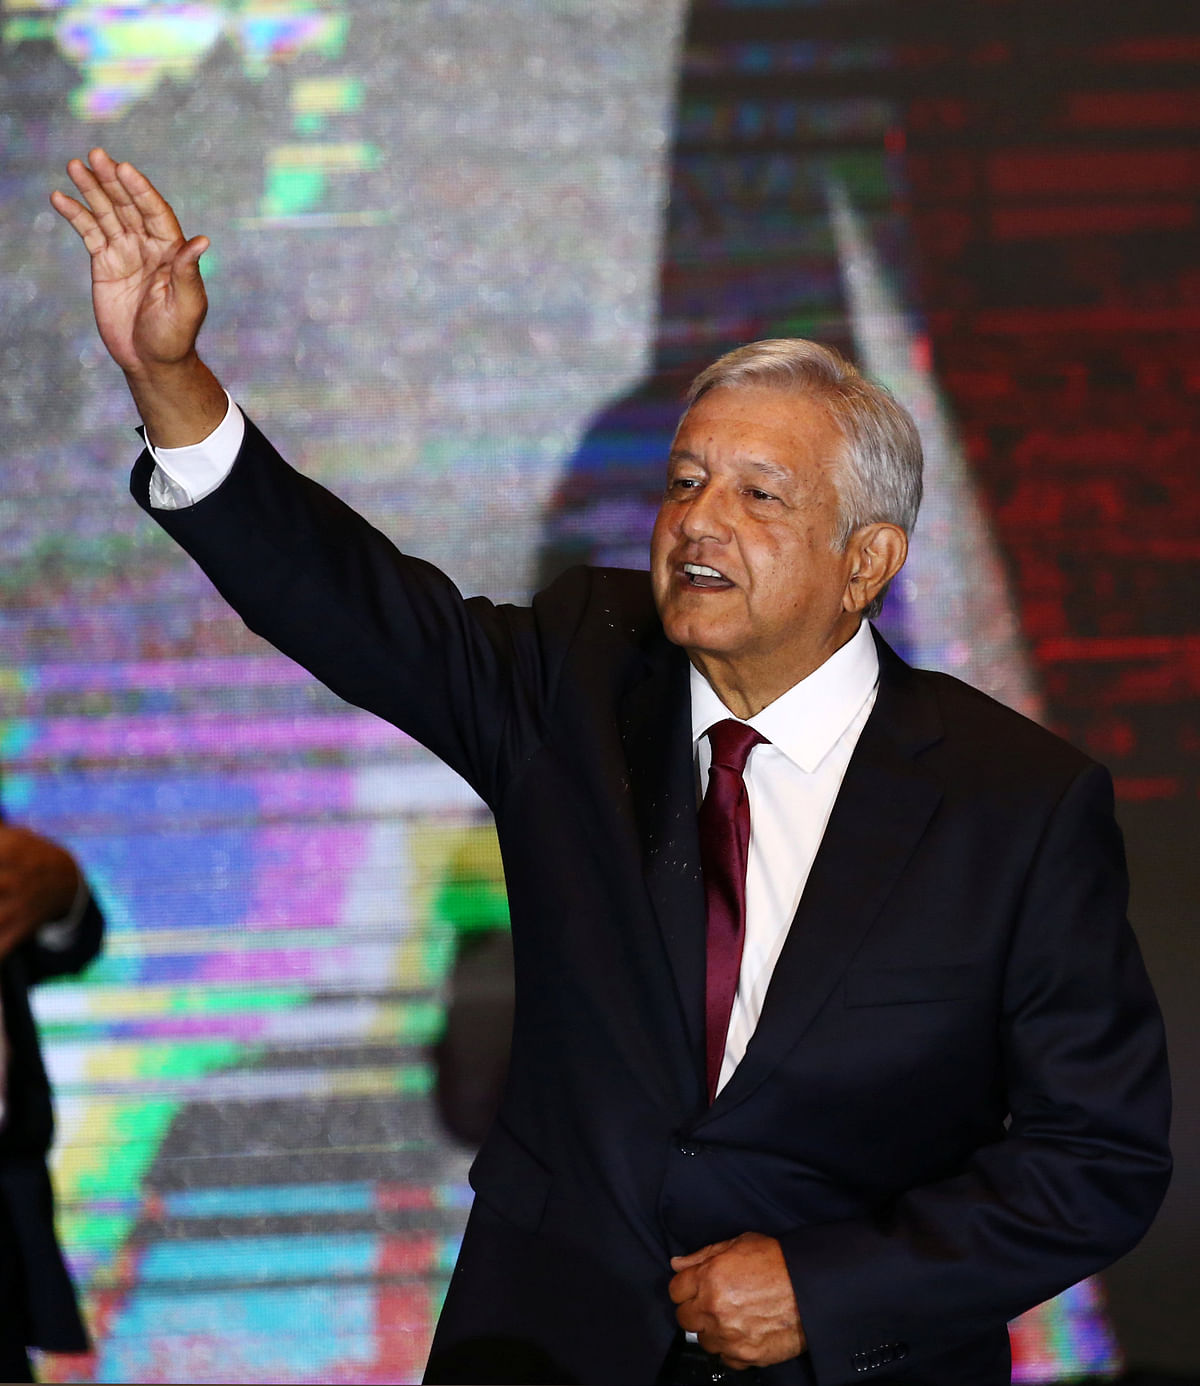 Presidential candidate Andres Manuel Lopez Obrador waves as he addresses supporters after polls closed in the presidential election, in Mexico City, Mexico on 1 July 2018. Photo: Reuters